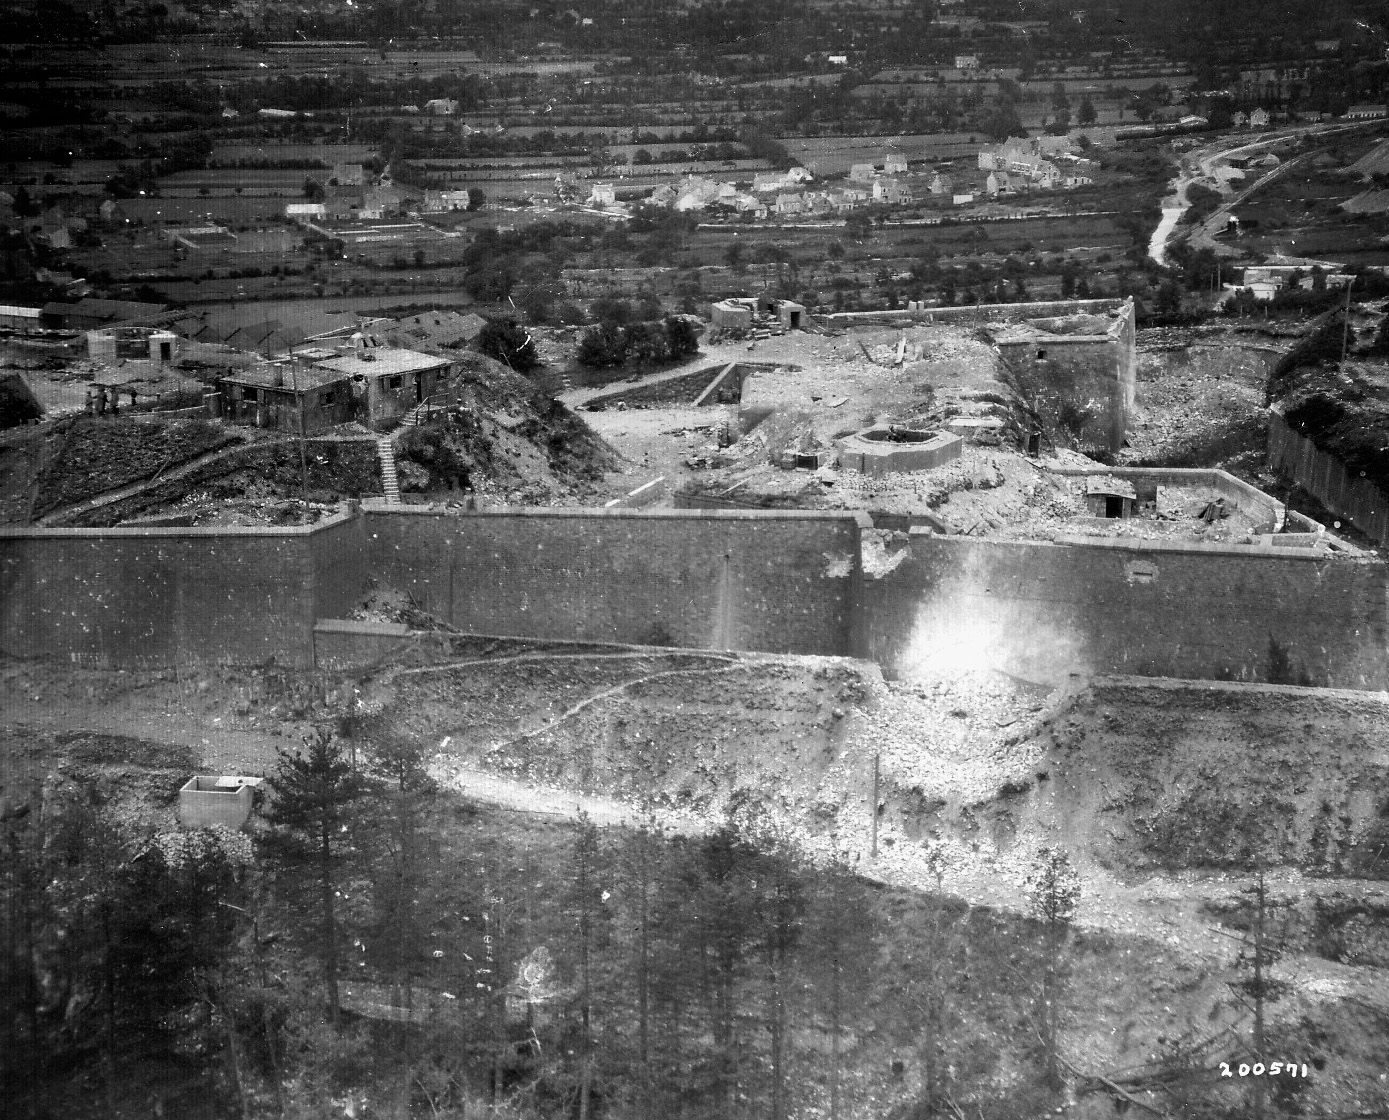 A German fortification located on a hill near the inner harbor of Cherbourg is shown under attack by American forces. The city was eventually surrendered by its defenders, but the port was unusable for some time.